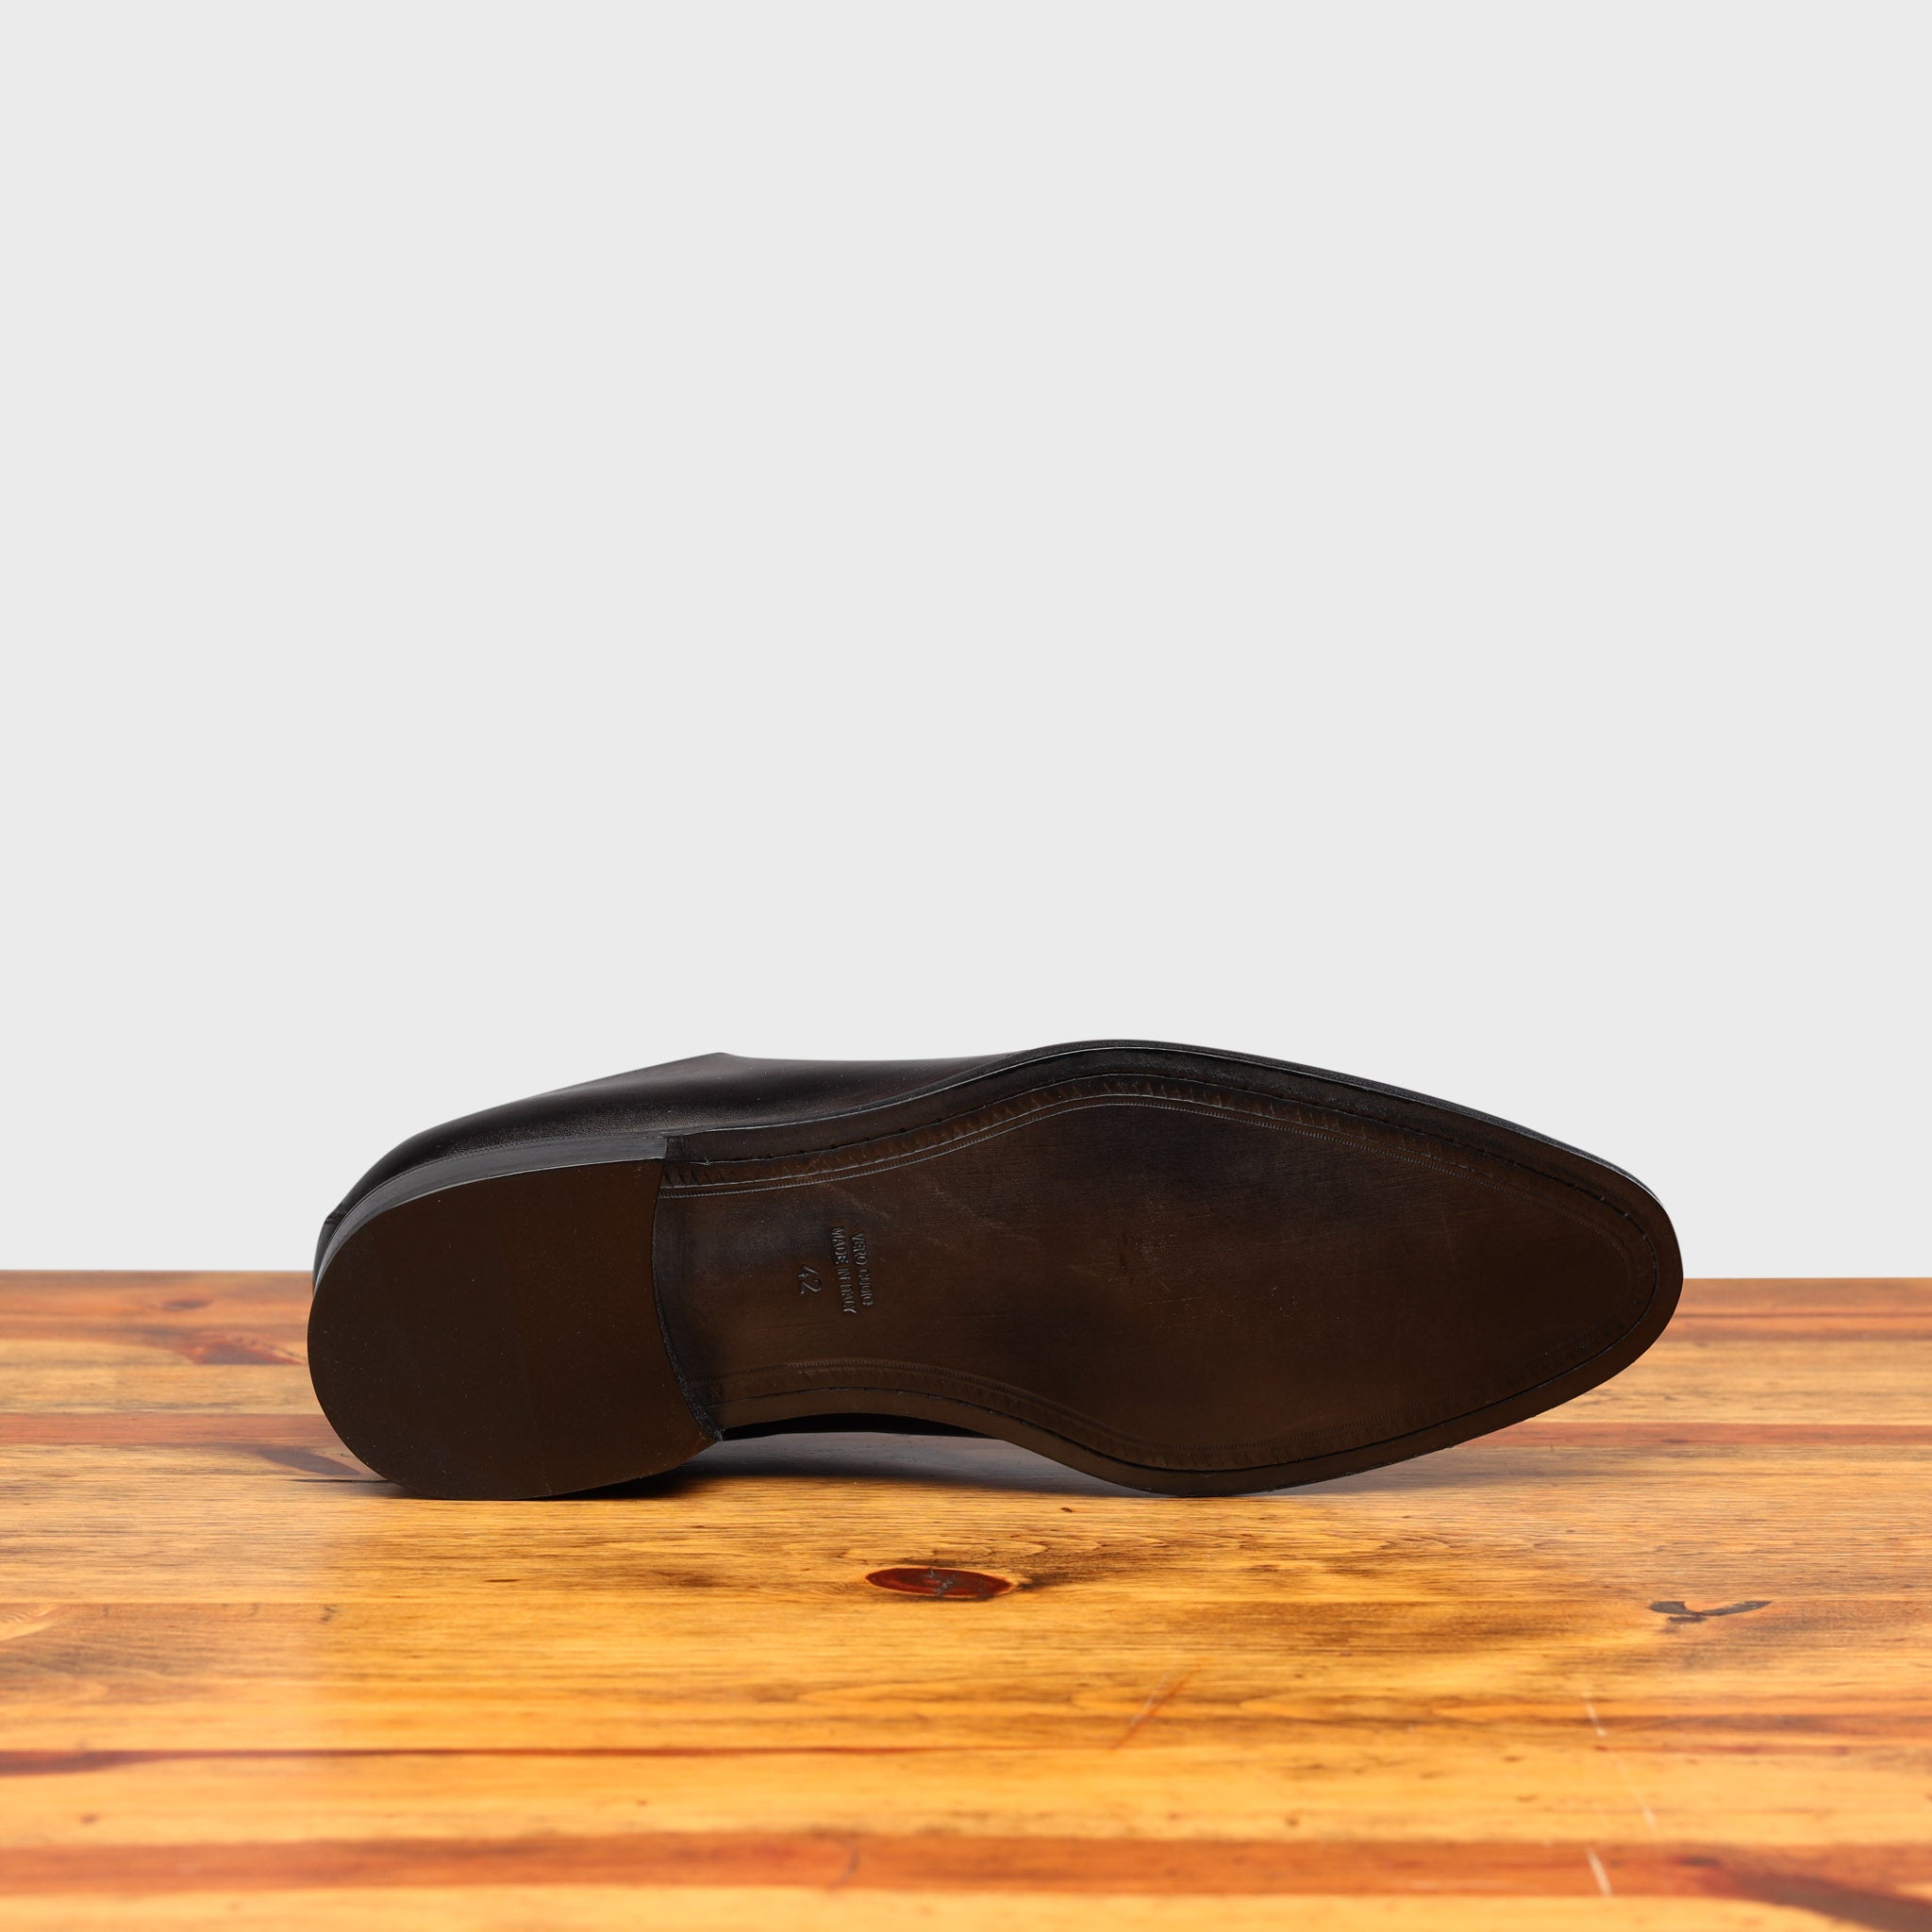 Full leather outsole of Q550 Calzoleria Toscana Graphite Cayenne Calf Wholecut on top of a wooden table